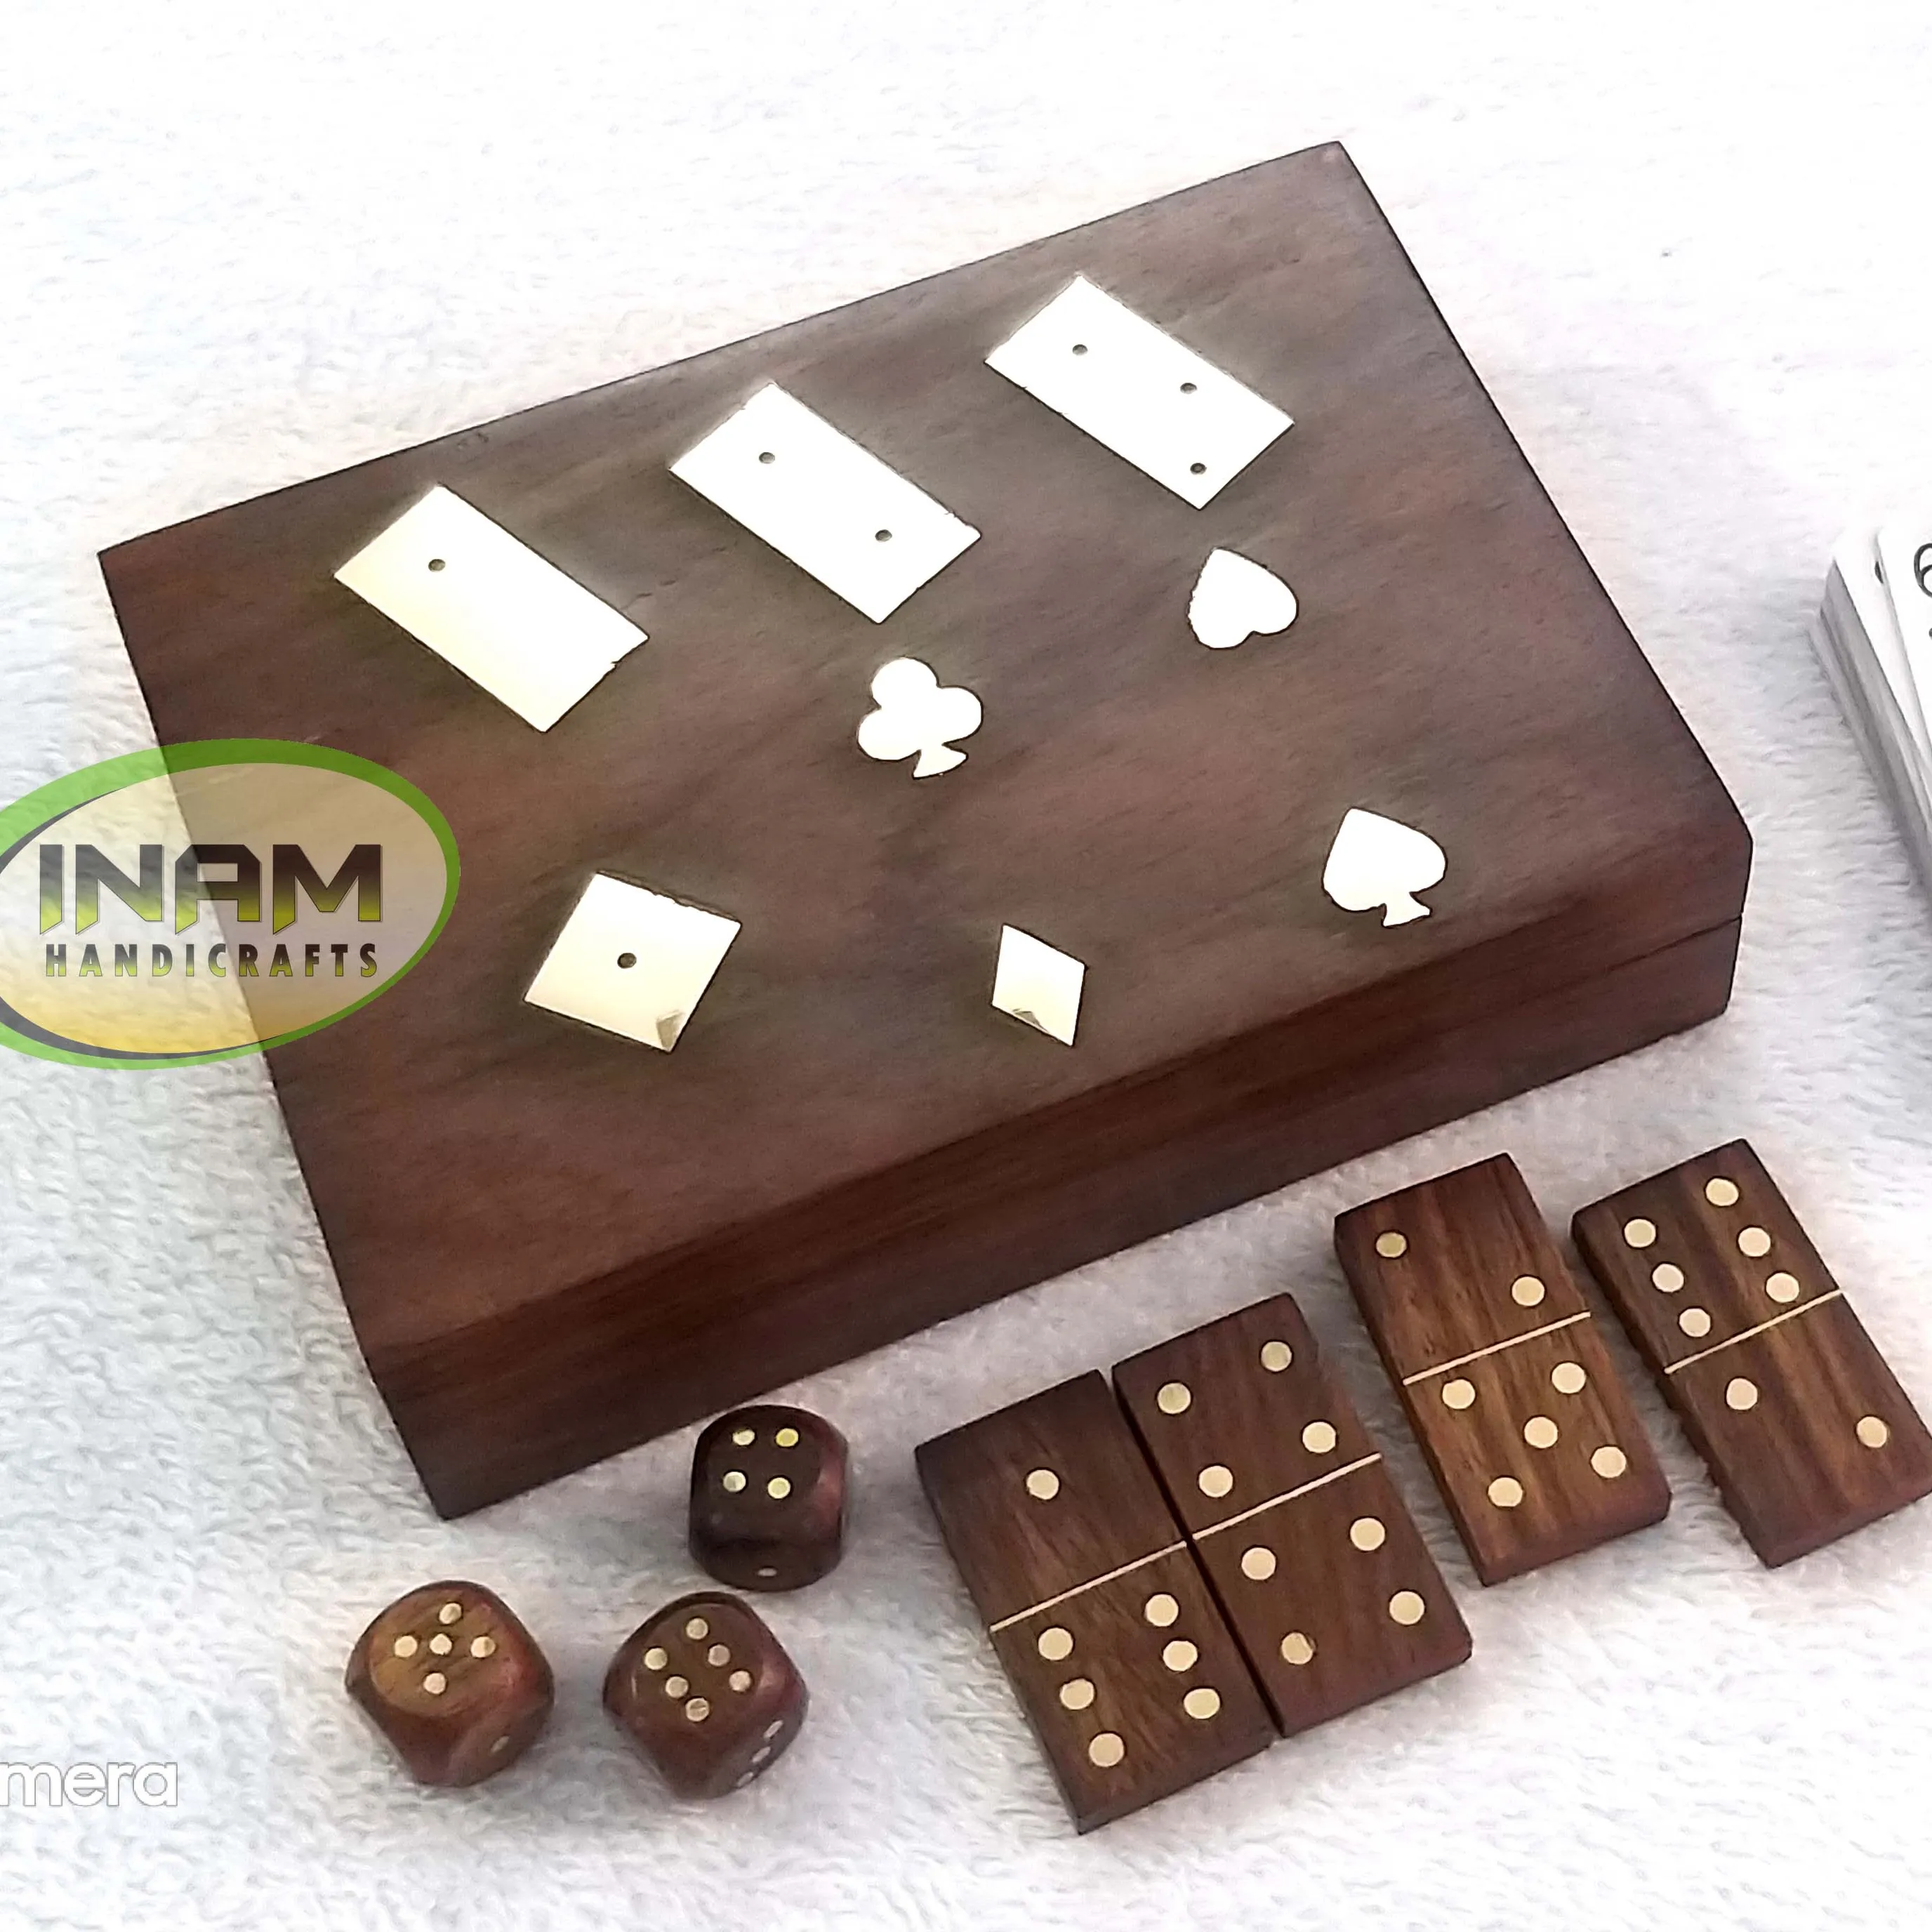 INAM'S best quality handmade wooden domino / playing cards box